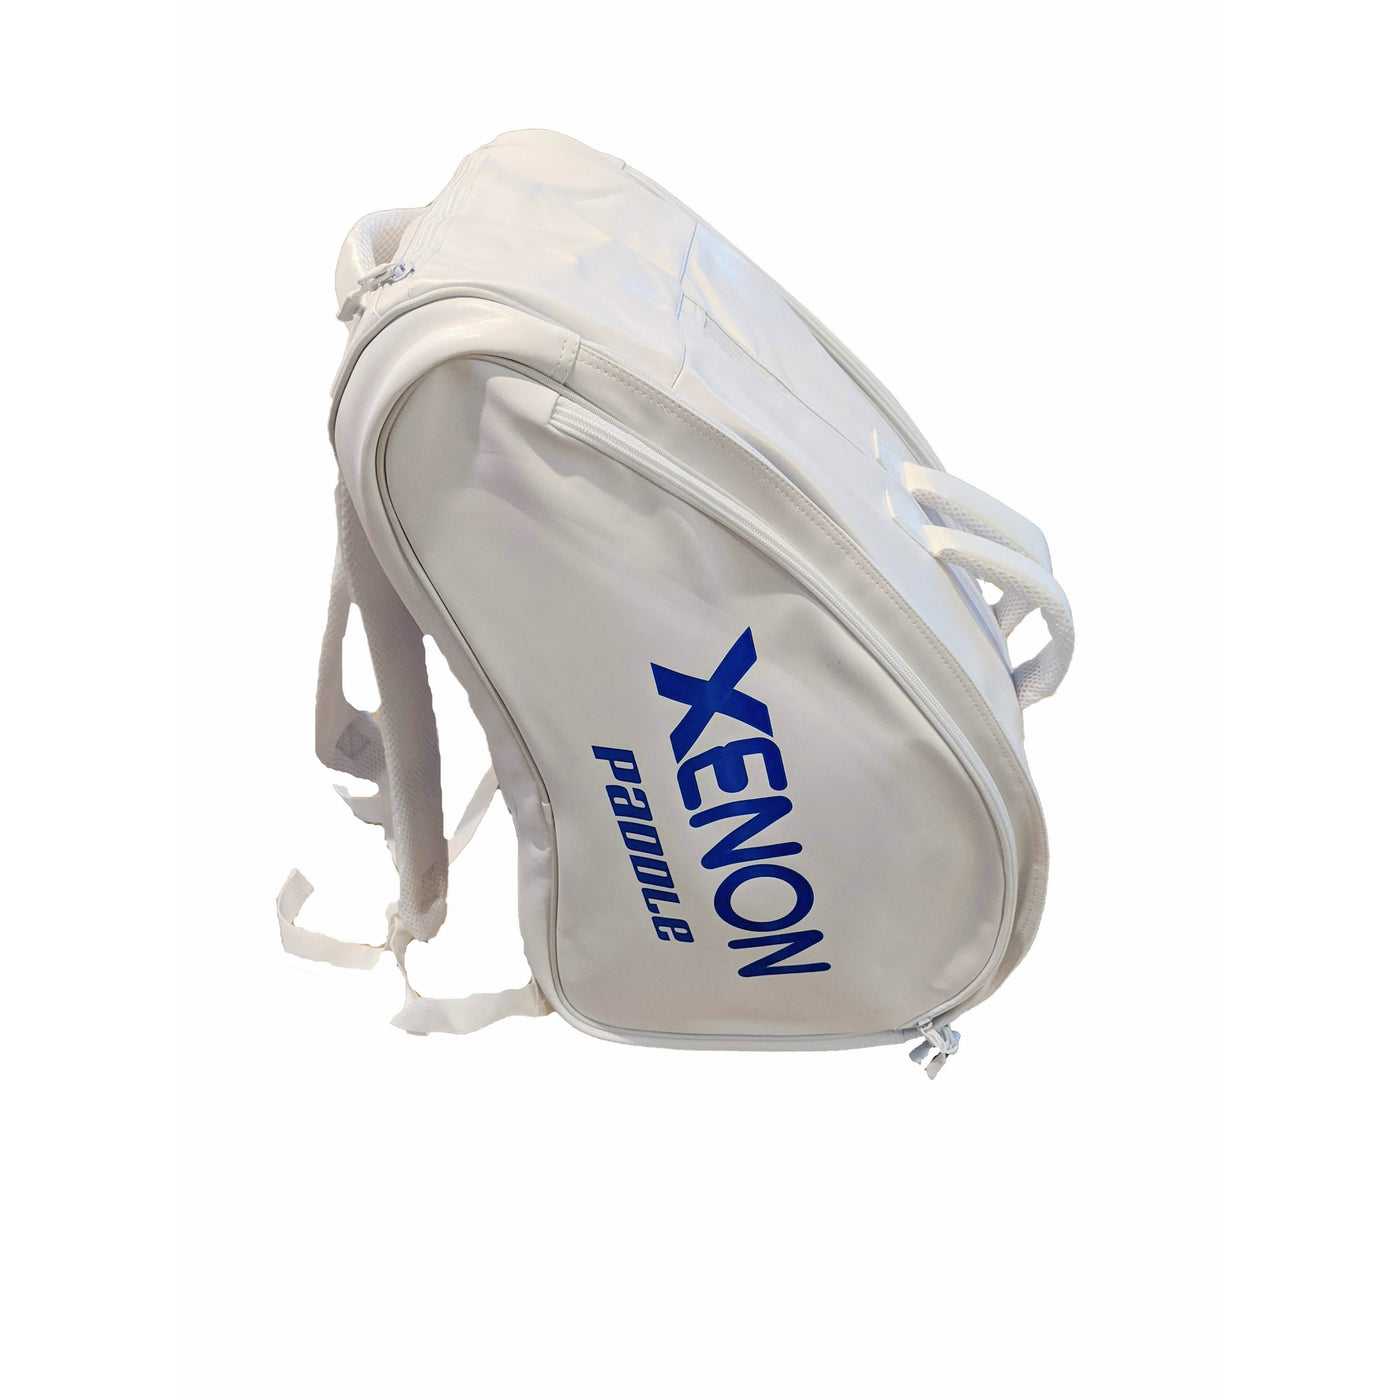 Xenon Paddle Tennis carry bag white large backpack